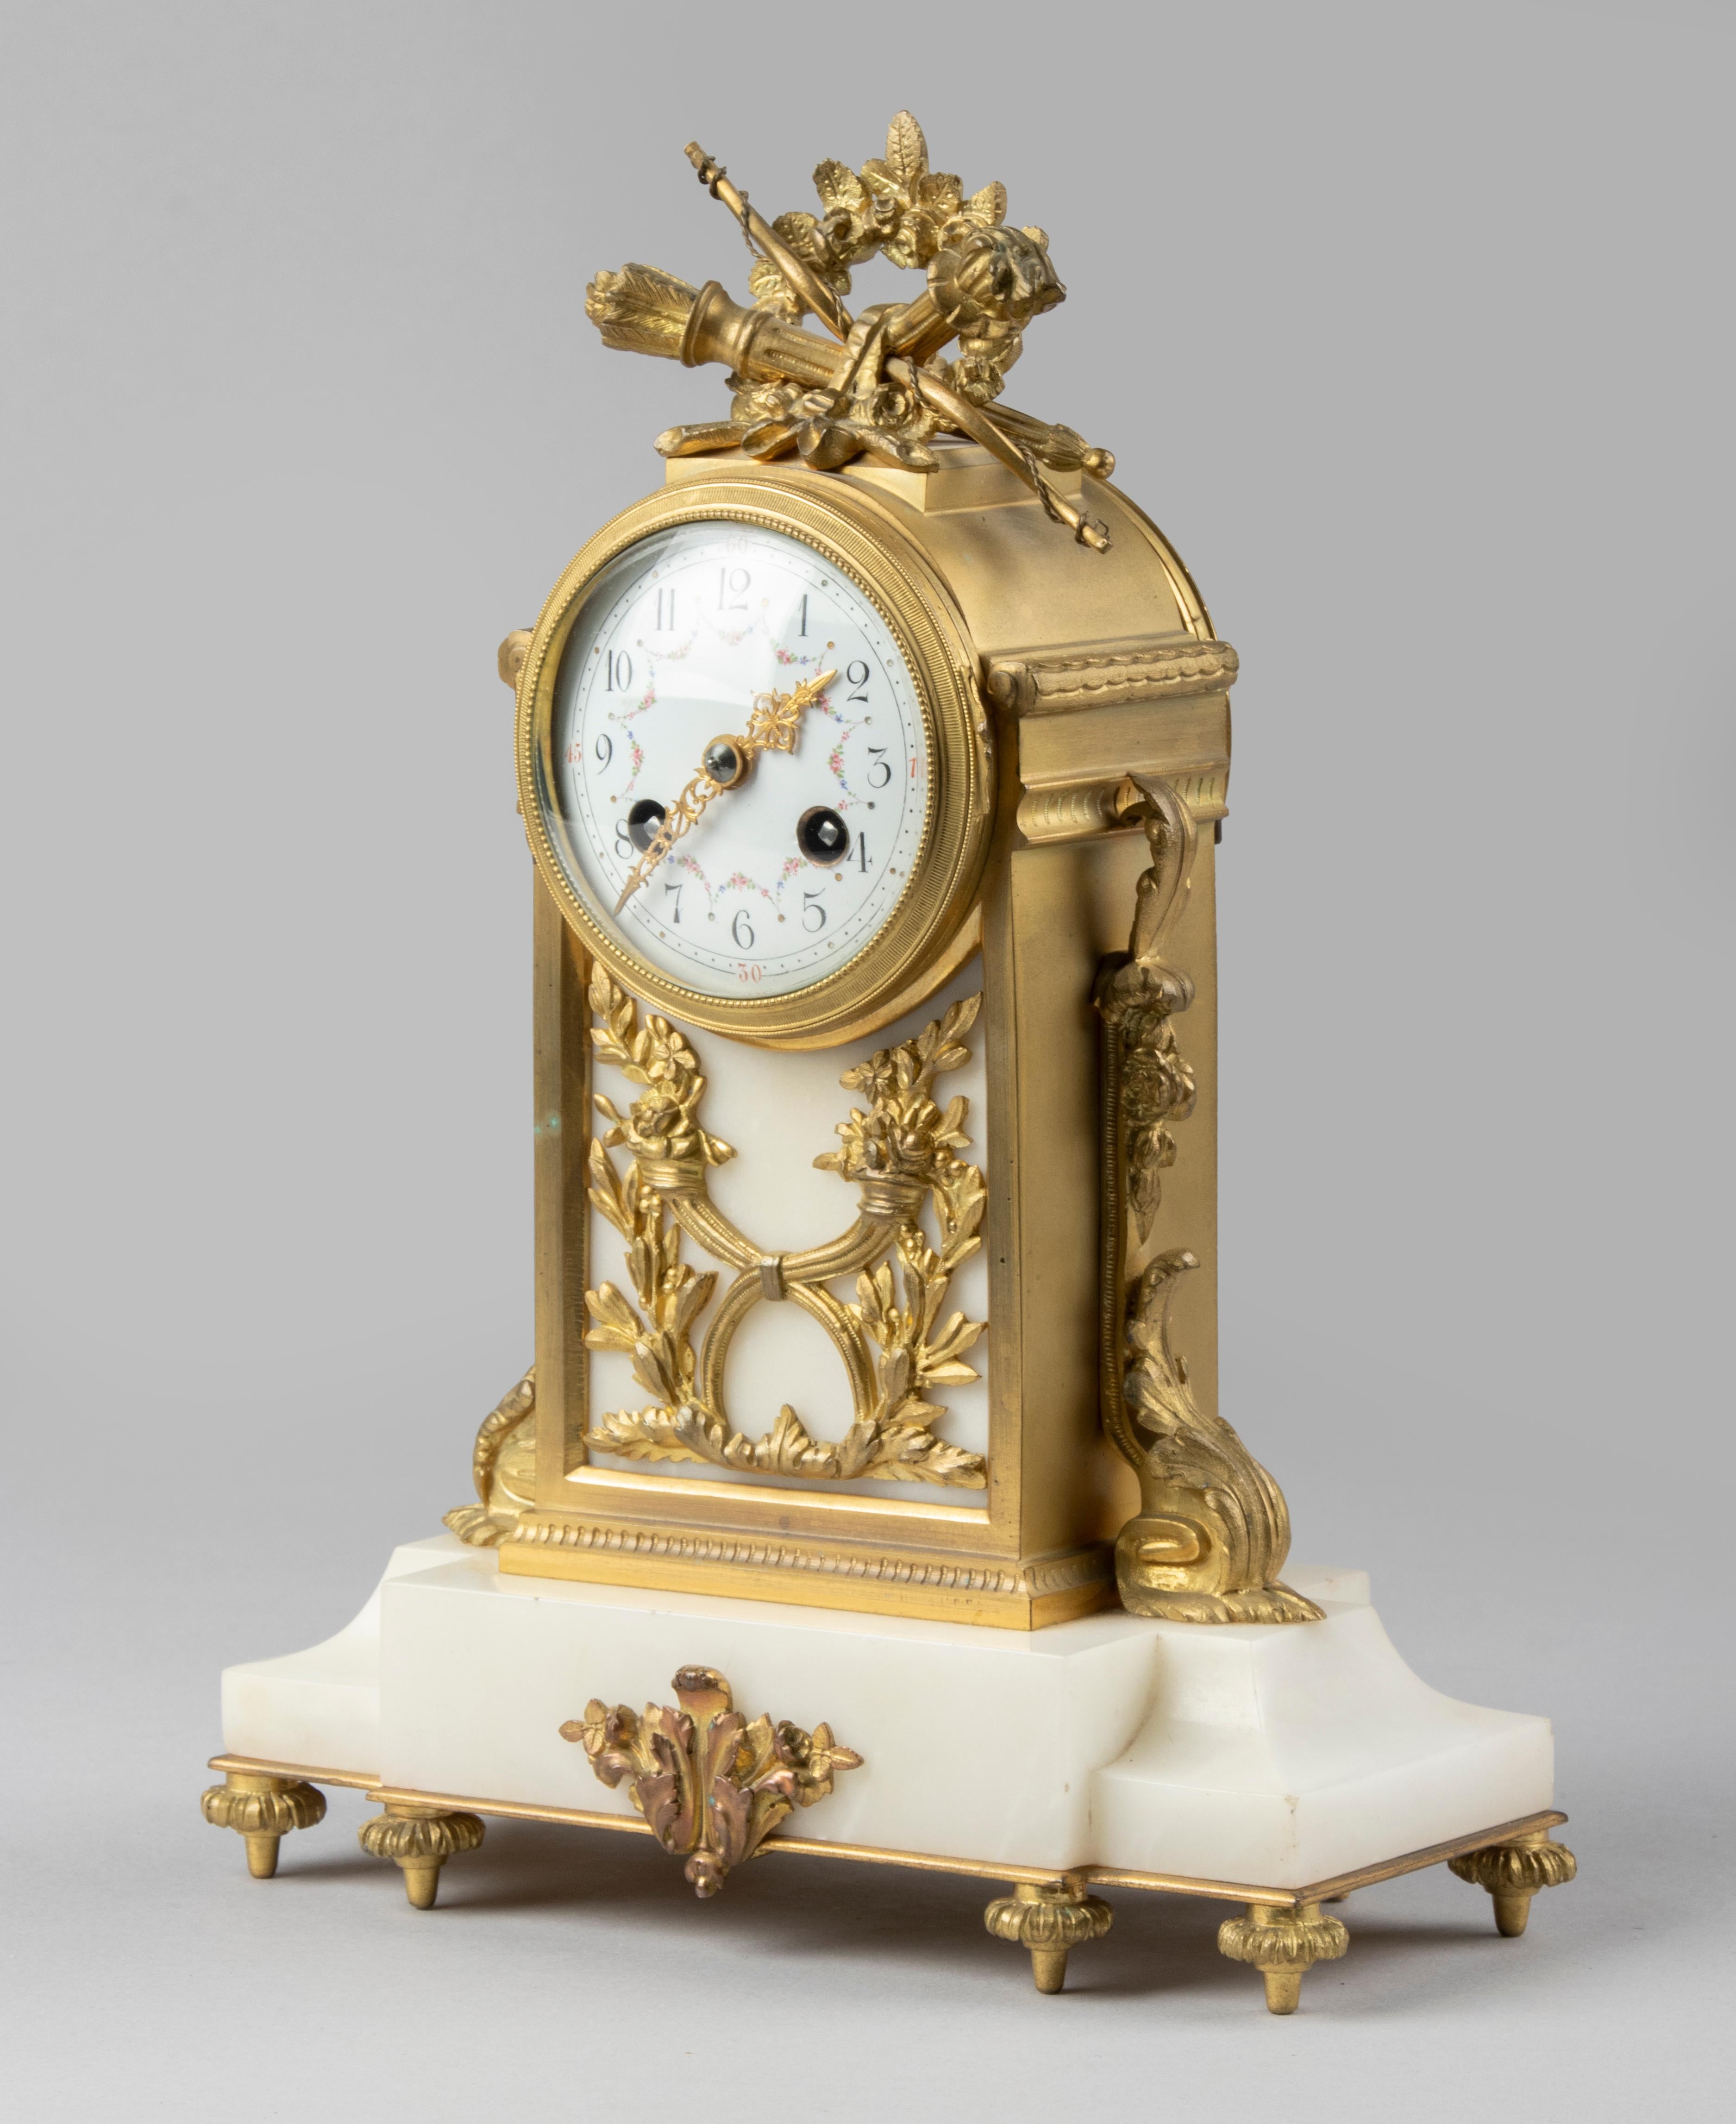 A French Louis XVI style bronze ormolu mantel clock. The case is made of gilt brass and bronze ormolu casted ornaments. Enameled dial with hours and minutes in Arabic numerals. Embellished with neo-classical ornaments, the upper part decorated with